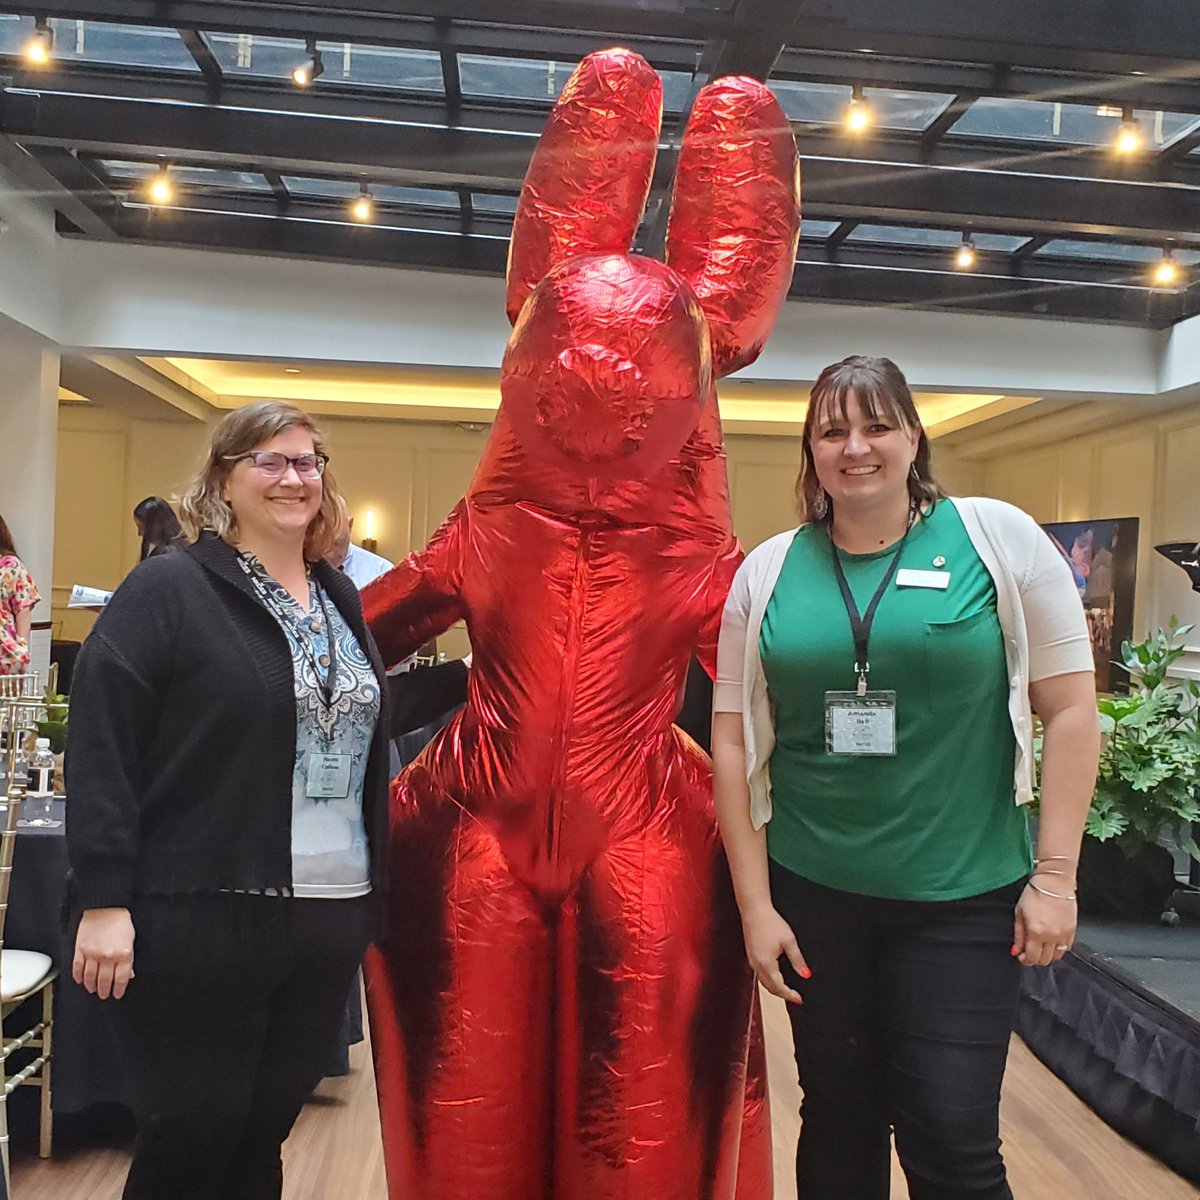 Just another Wednesday with teachers, admin, consultants, and a giant balloon dog! 😁
#BalloonAnimals #WhatTheWhat #Sofici #SchoolOnFire #NKCES #DeeperLearning #HotelCovington #Eminence #ConnectGrowServe